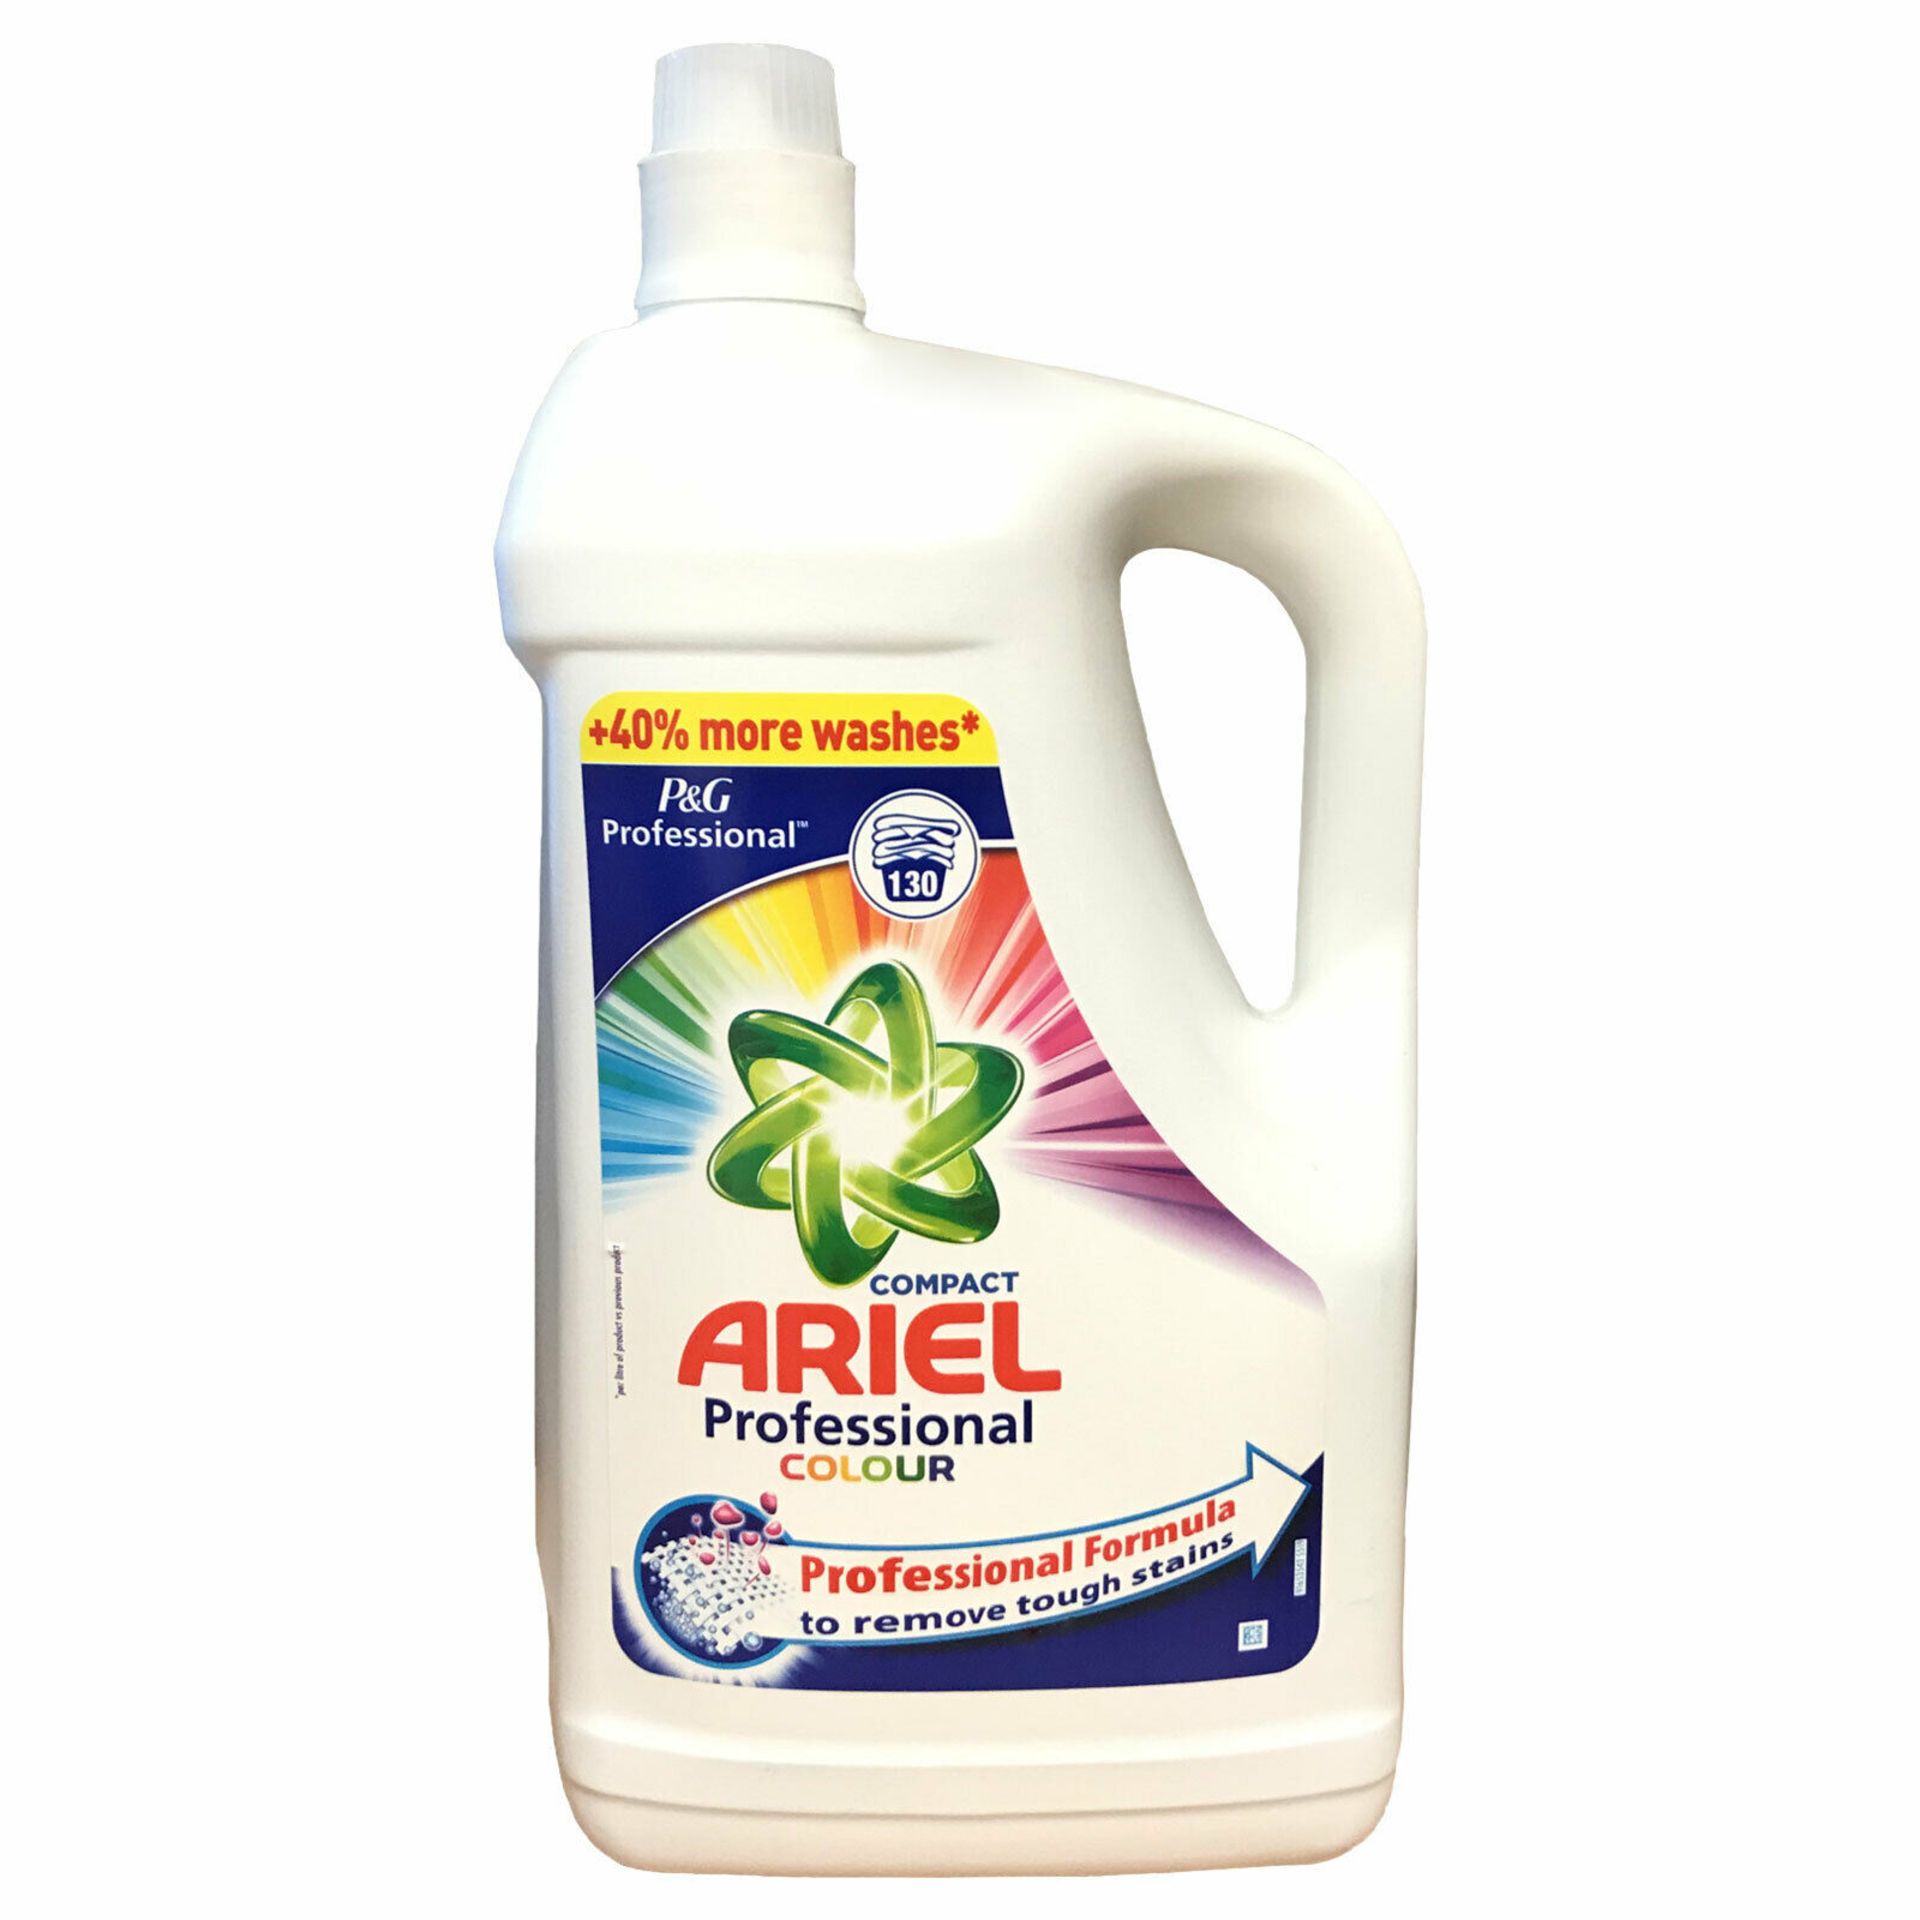 V Brand New 4.55L Ariel Professional Colour Laundry Detergent - Up to 130 Washes